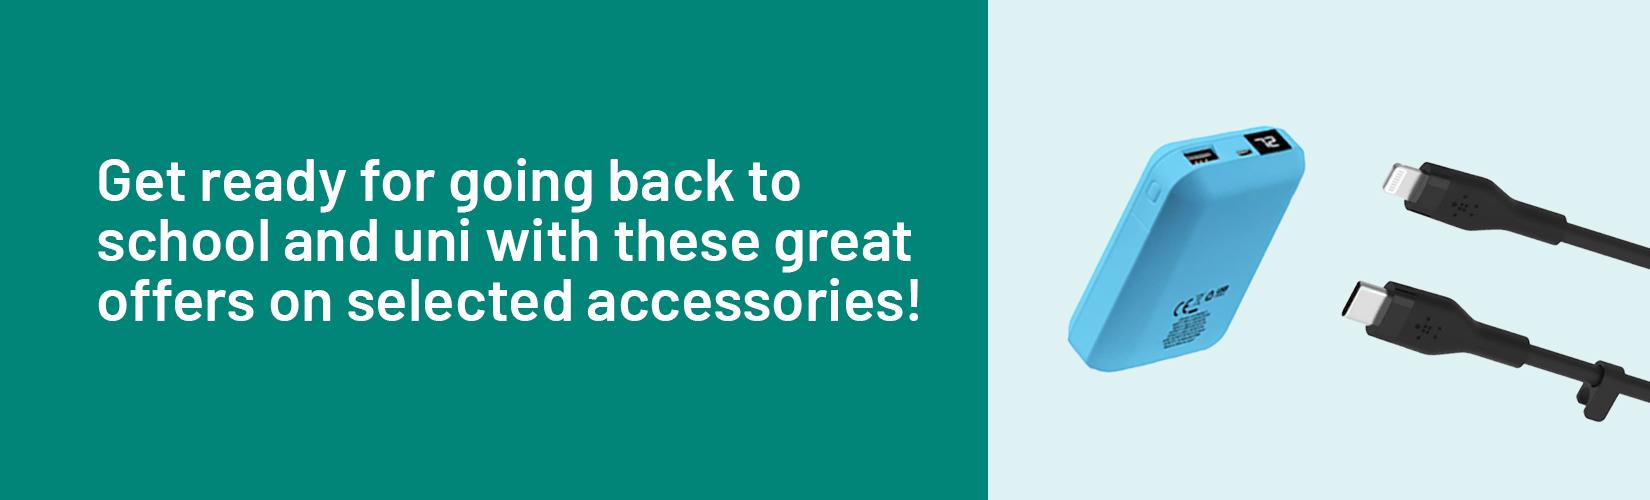 Get ready for going back to school and uni with these great offers on selected accessories!